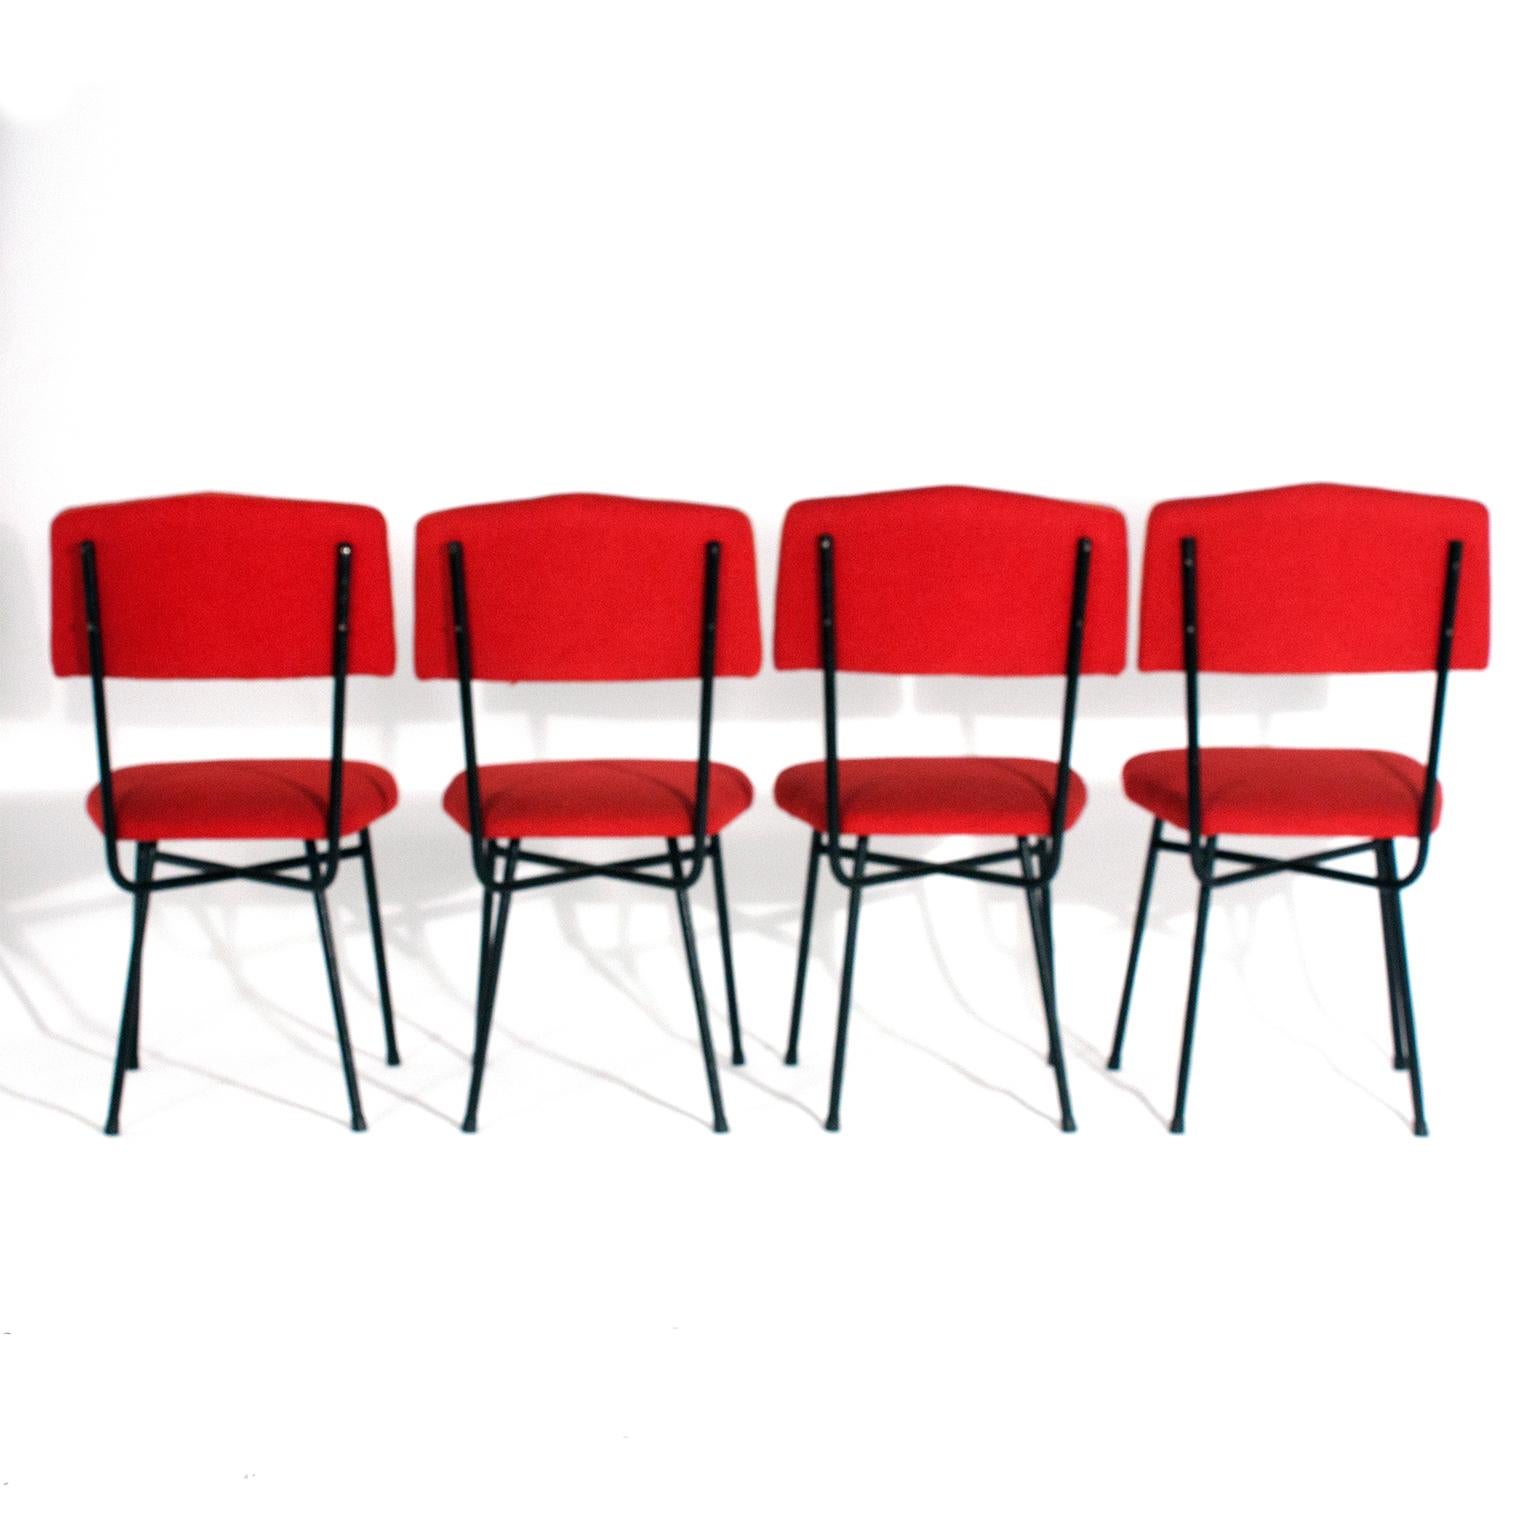 Mid-Century Modern Set of Four Italian Chairs, Italy, 1950s, Iron and Red Fabric